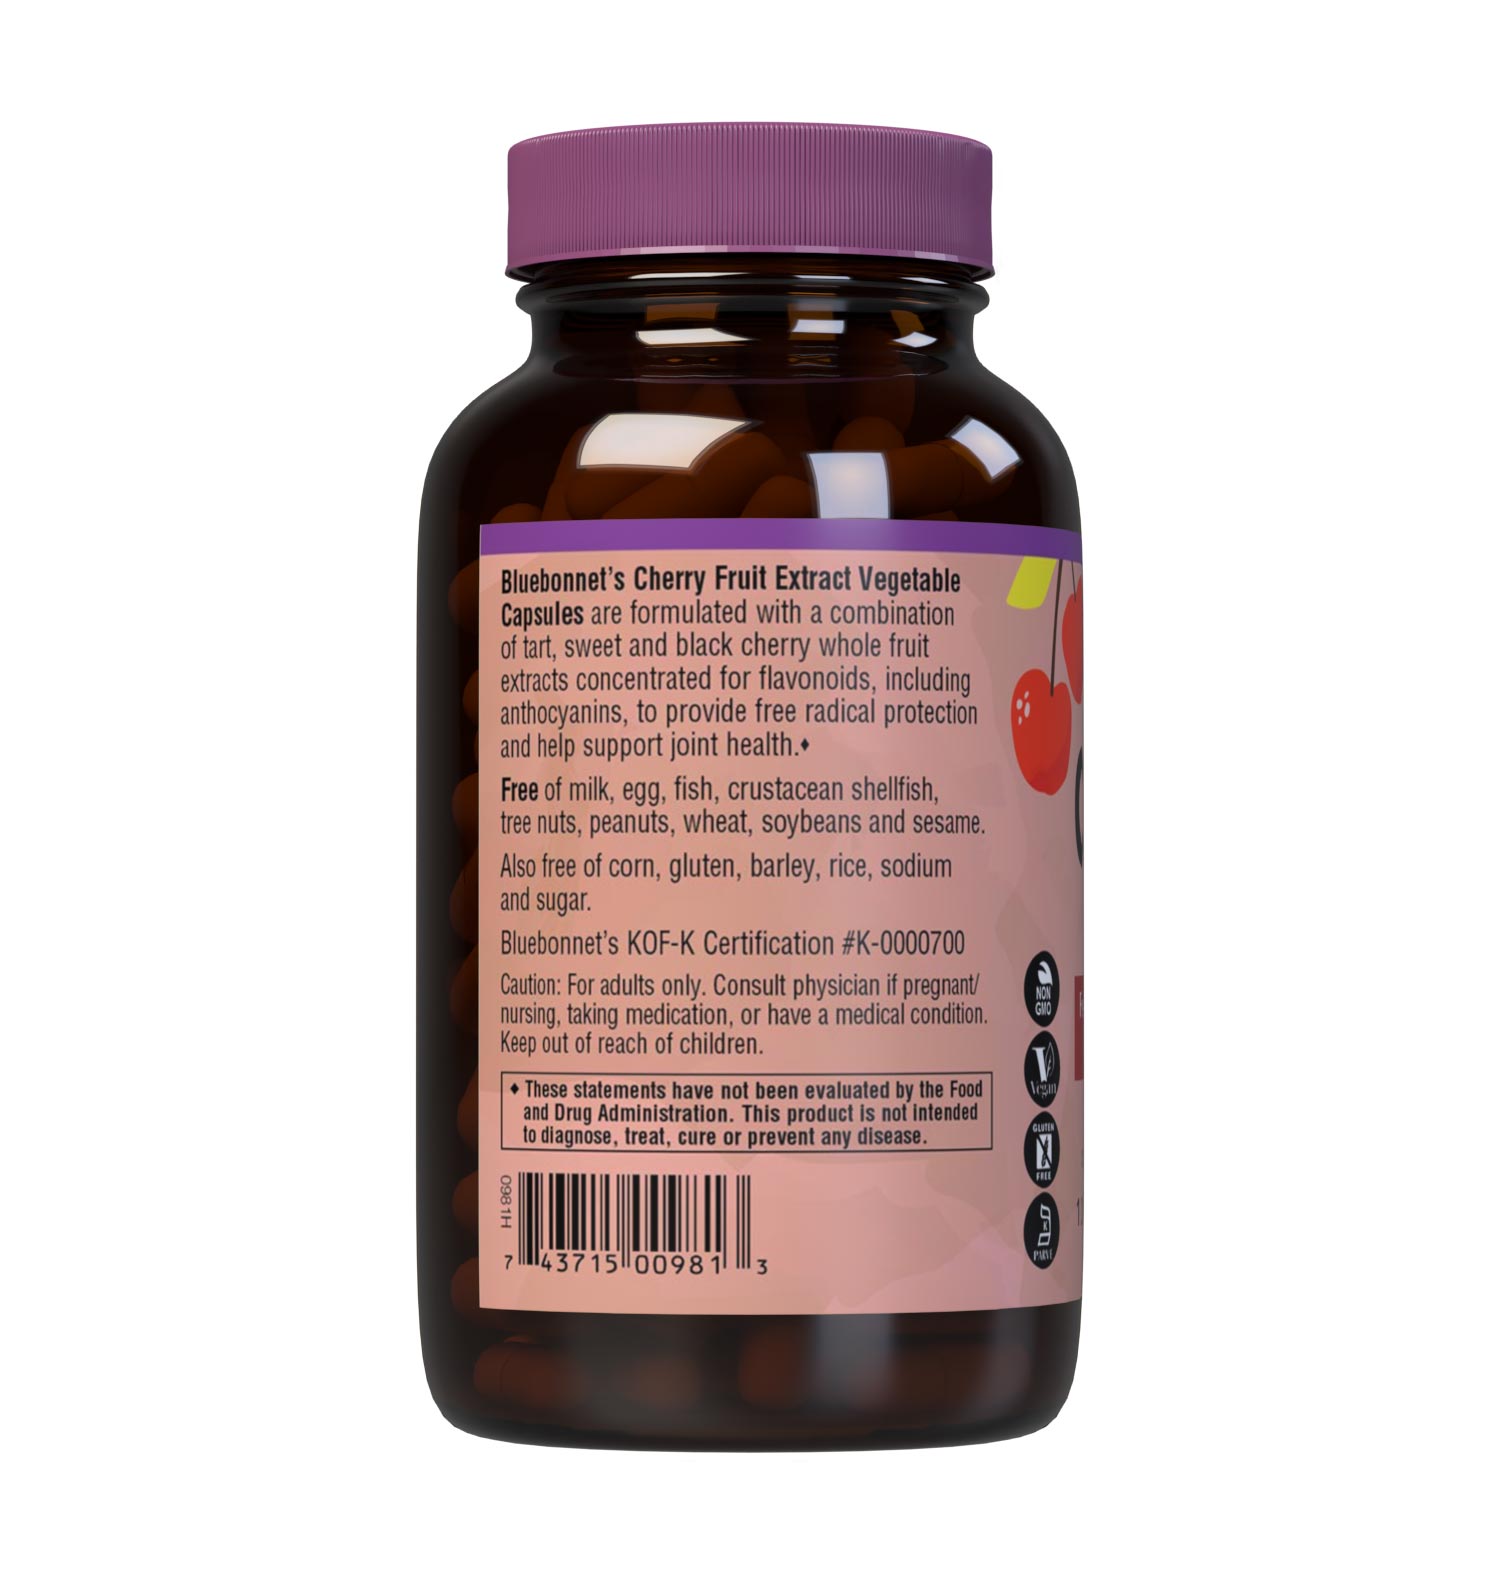 Bluebonnet's Cherry Fruit Extract 120 Vegetable Capsules are formulated with a combination of tart, sweet and black cherry to provide free radical protection and support joint health. Description panel. #size_120 count